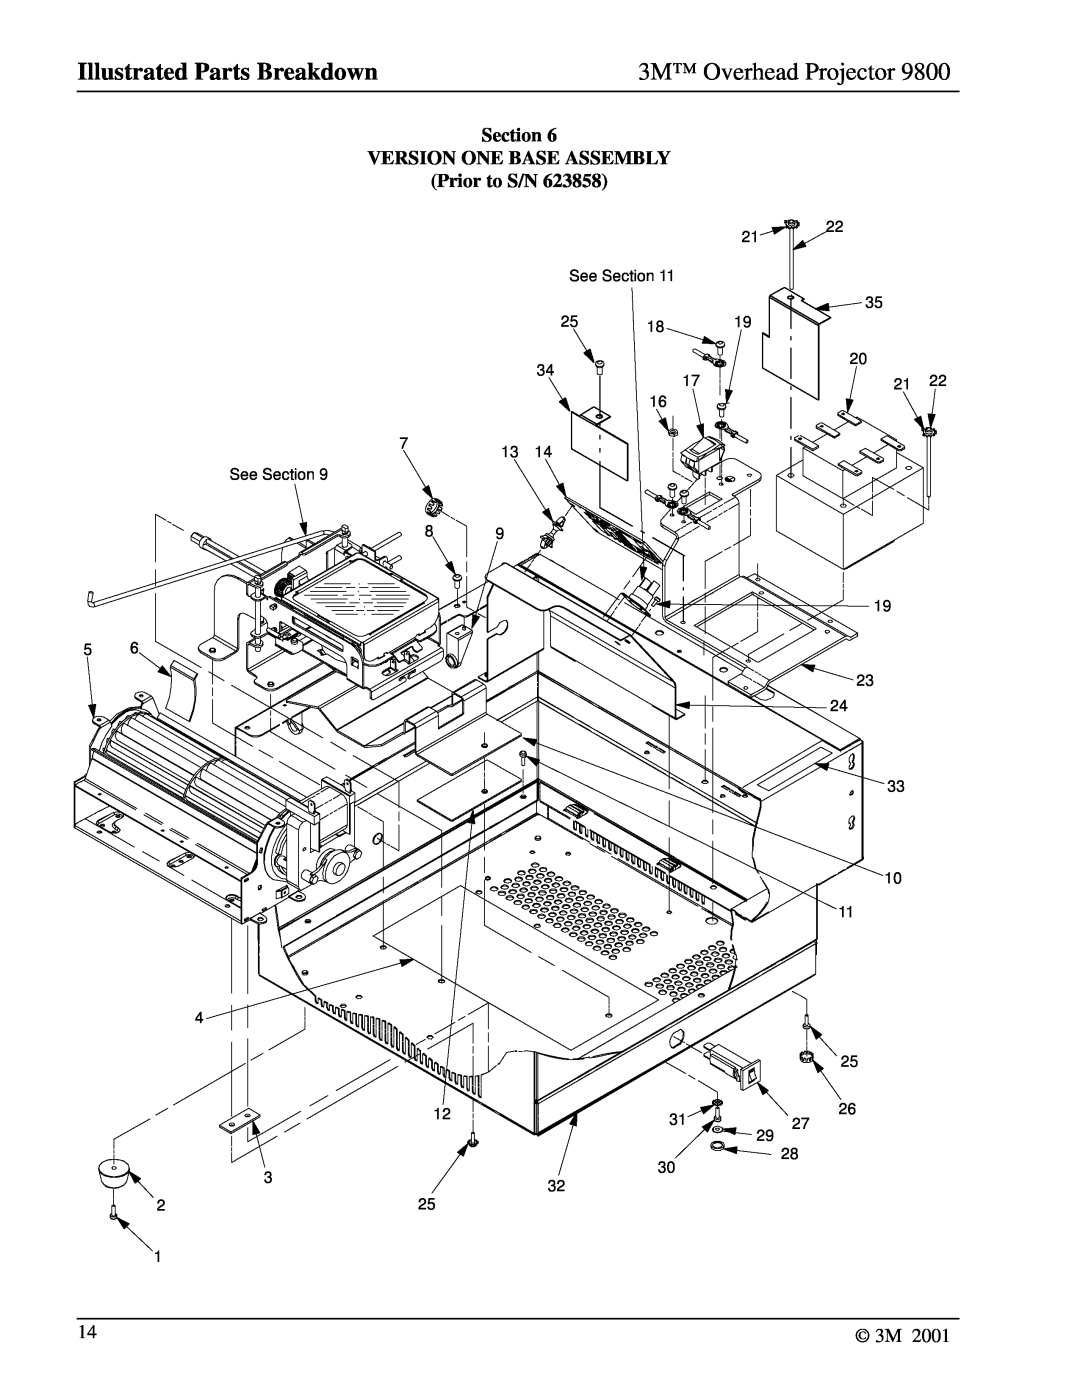 3M 9800 manual Section VERSION ONE BASE ASSEMBLY Prior to S/N, Illustrated Parts Breakdown, 3M Overhead Projector 